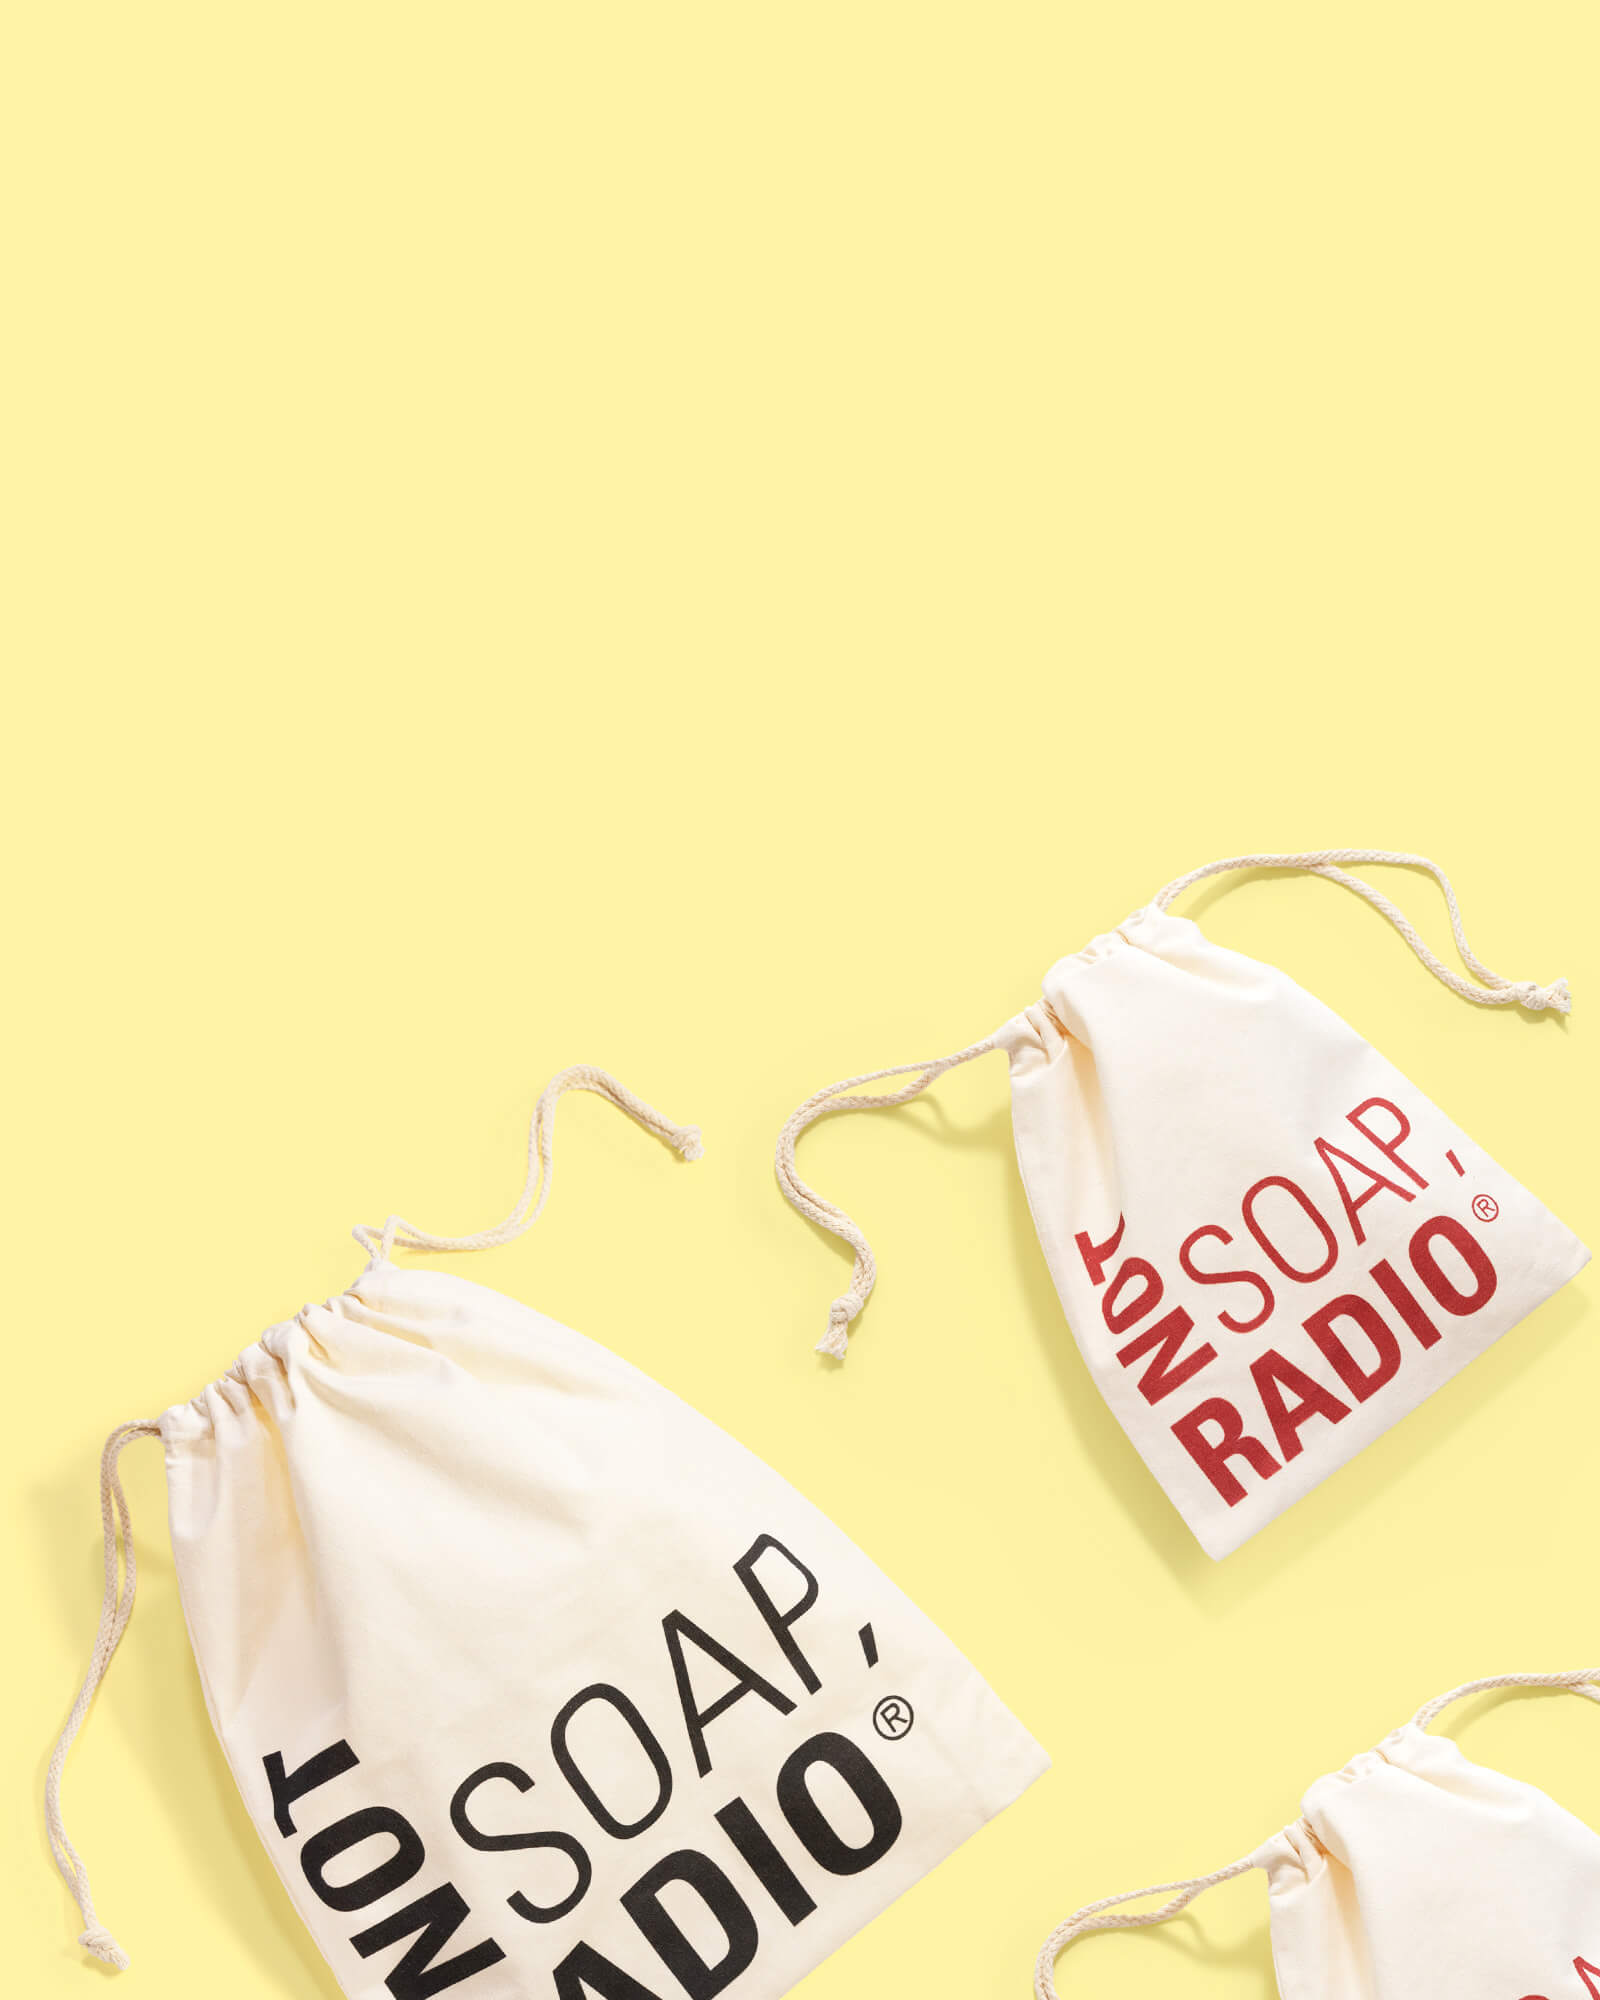 Canvas drawstring gift bags with the Not Soap, Radio logo on them, on a yellow background.